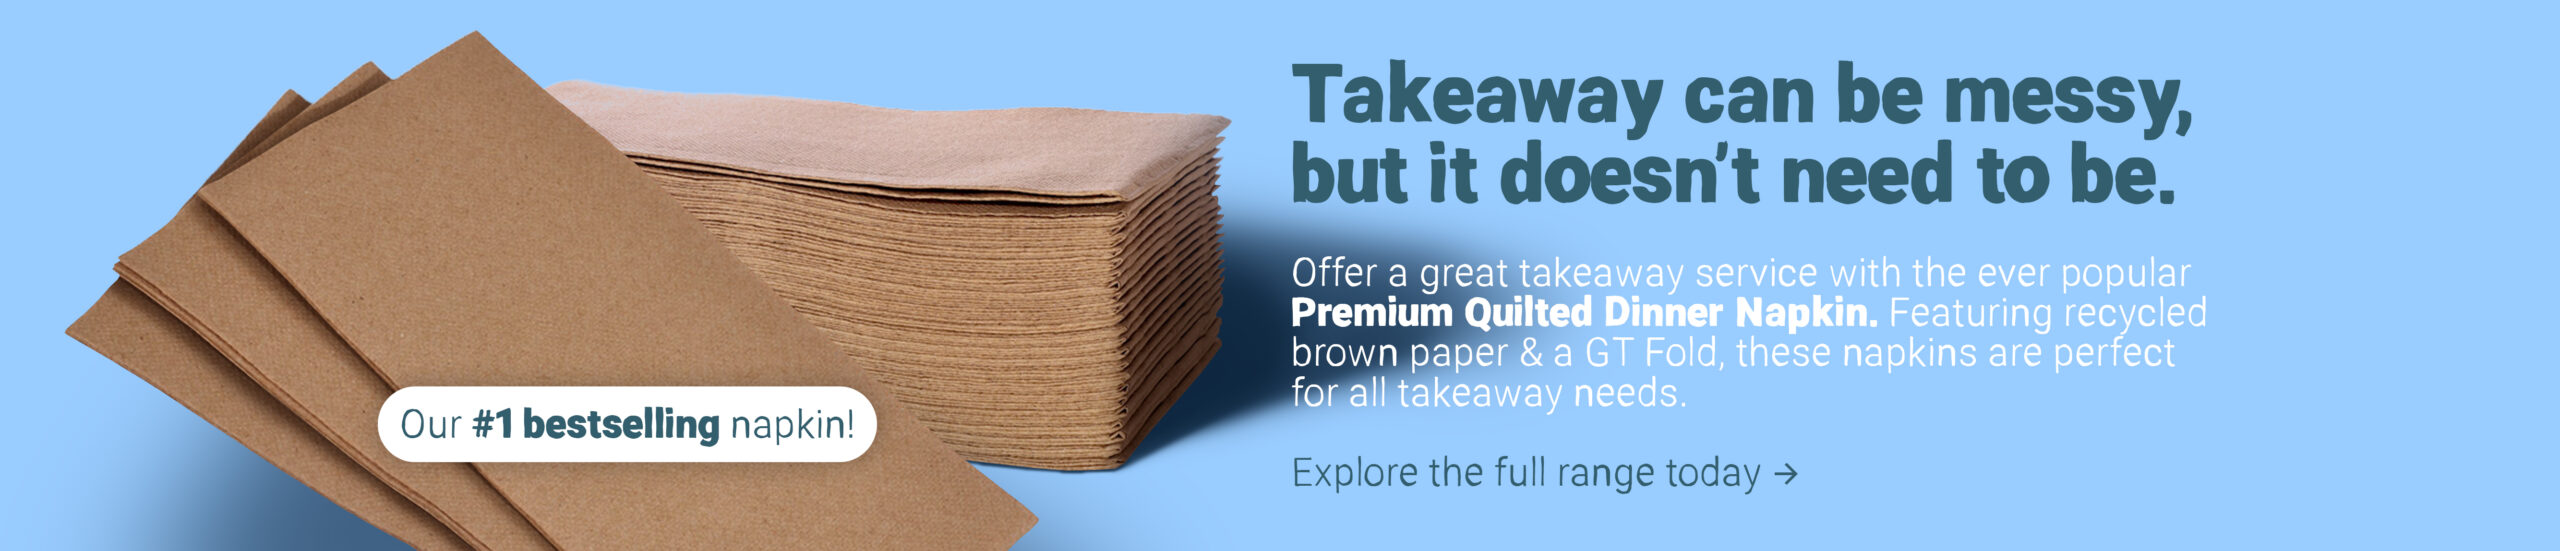 Brown Dinner Napkin, perfect for takeaway or dining in. Paper napkins